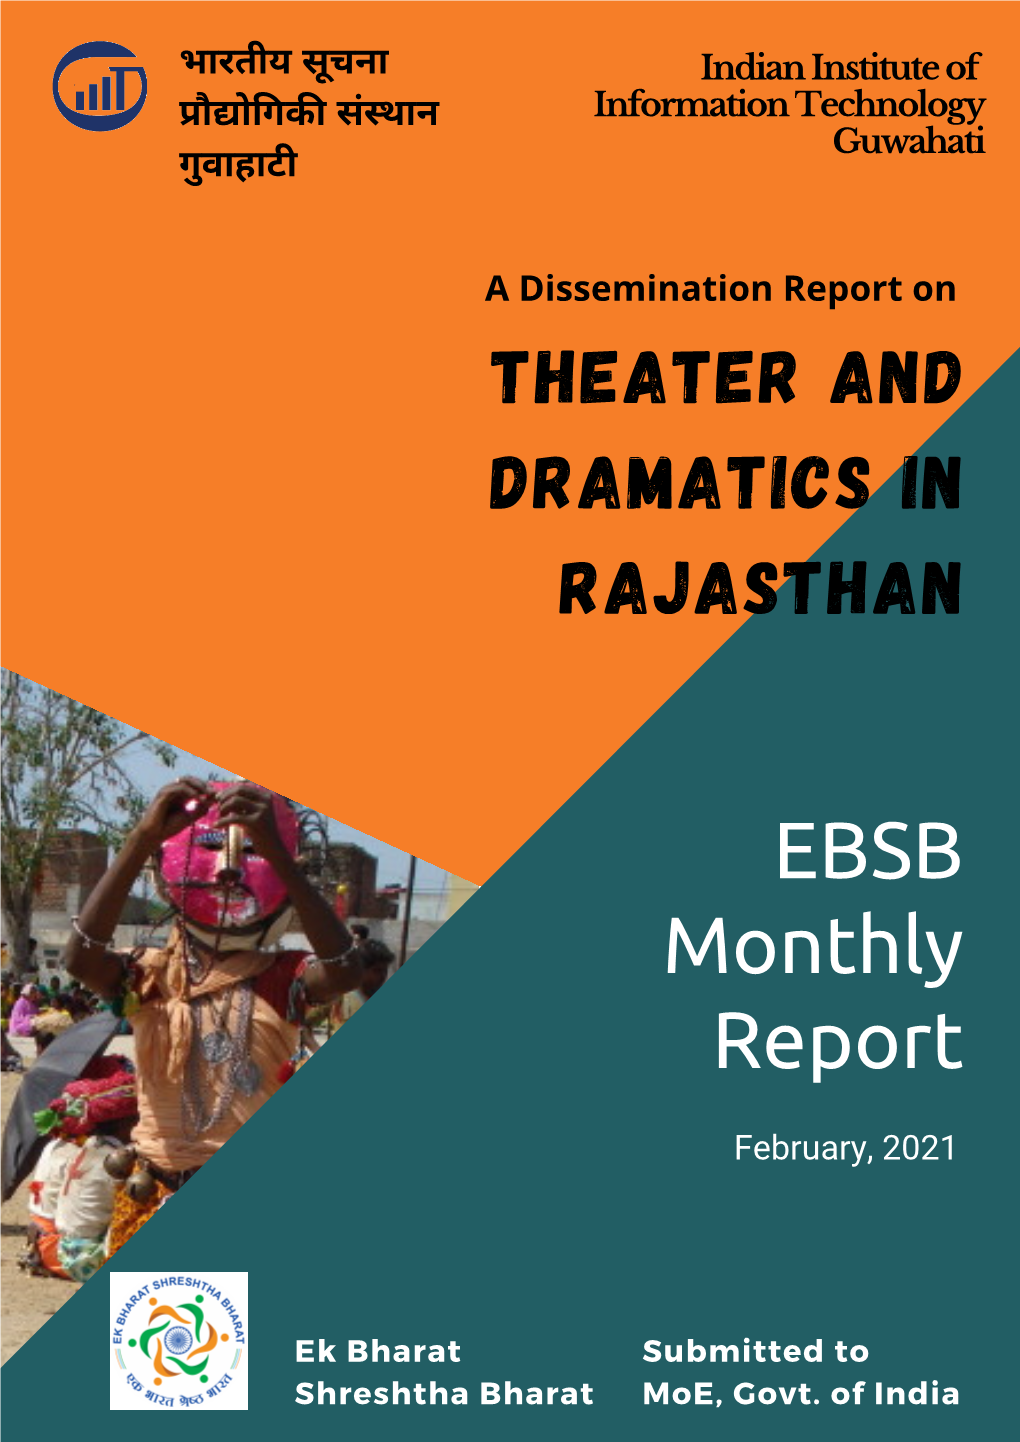 EBSB Monthly Report February 2021